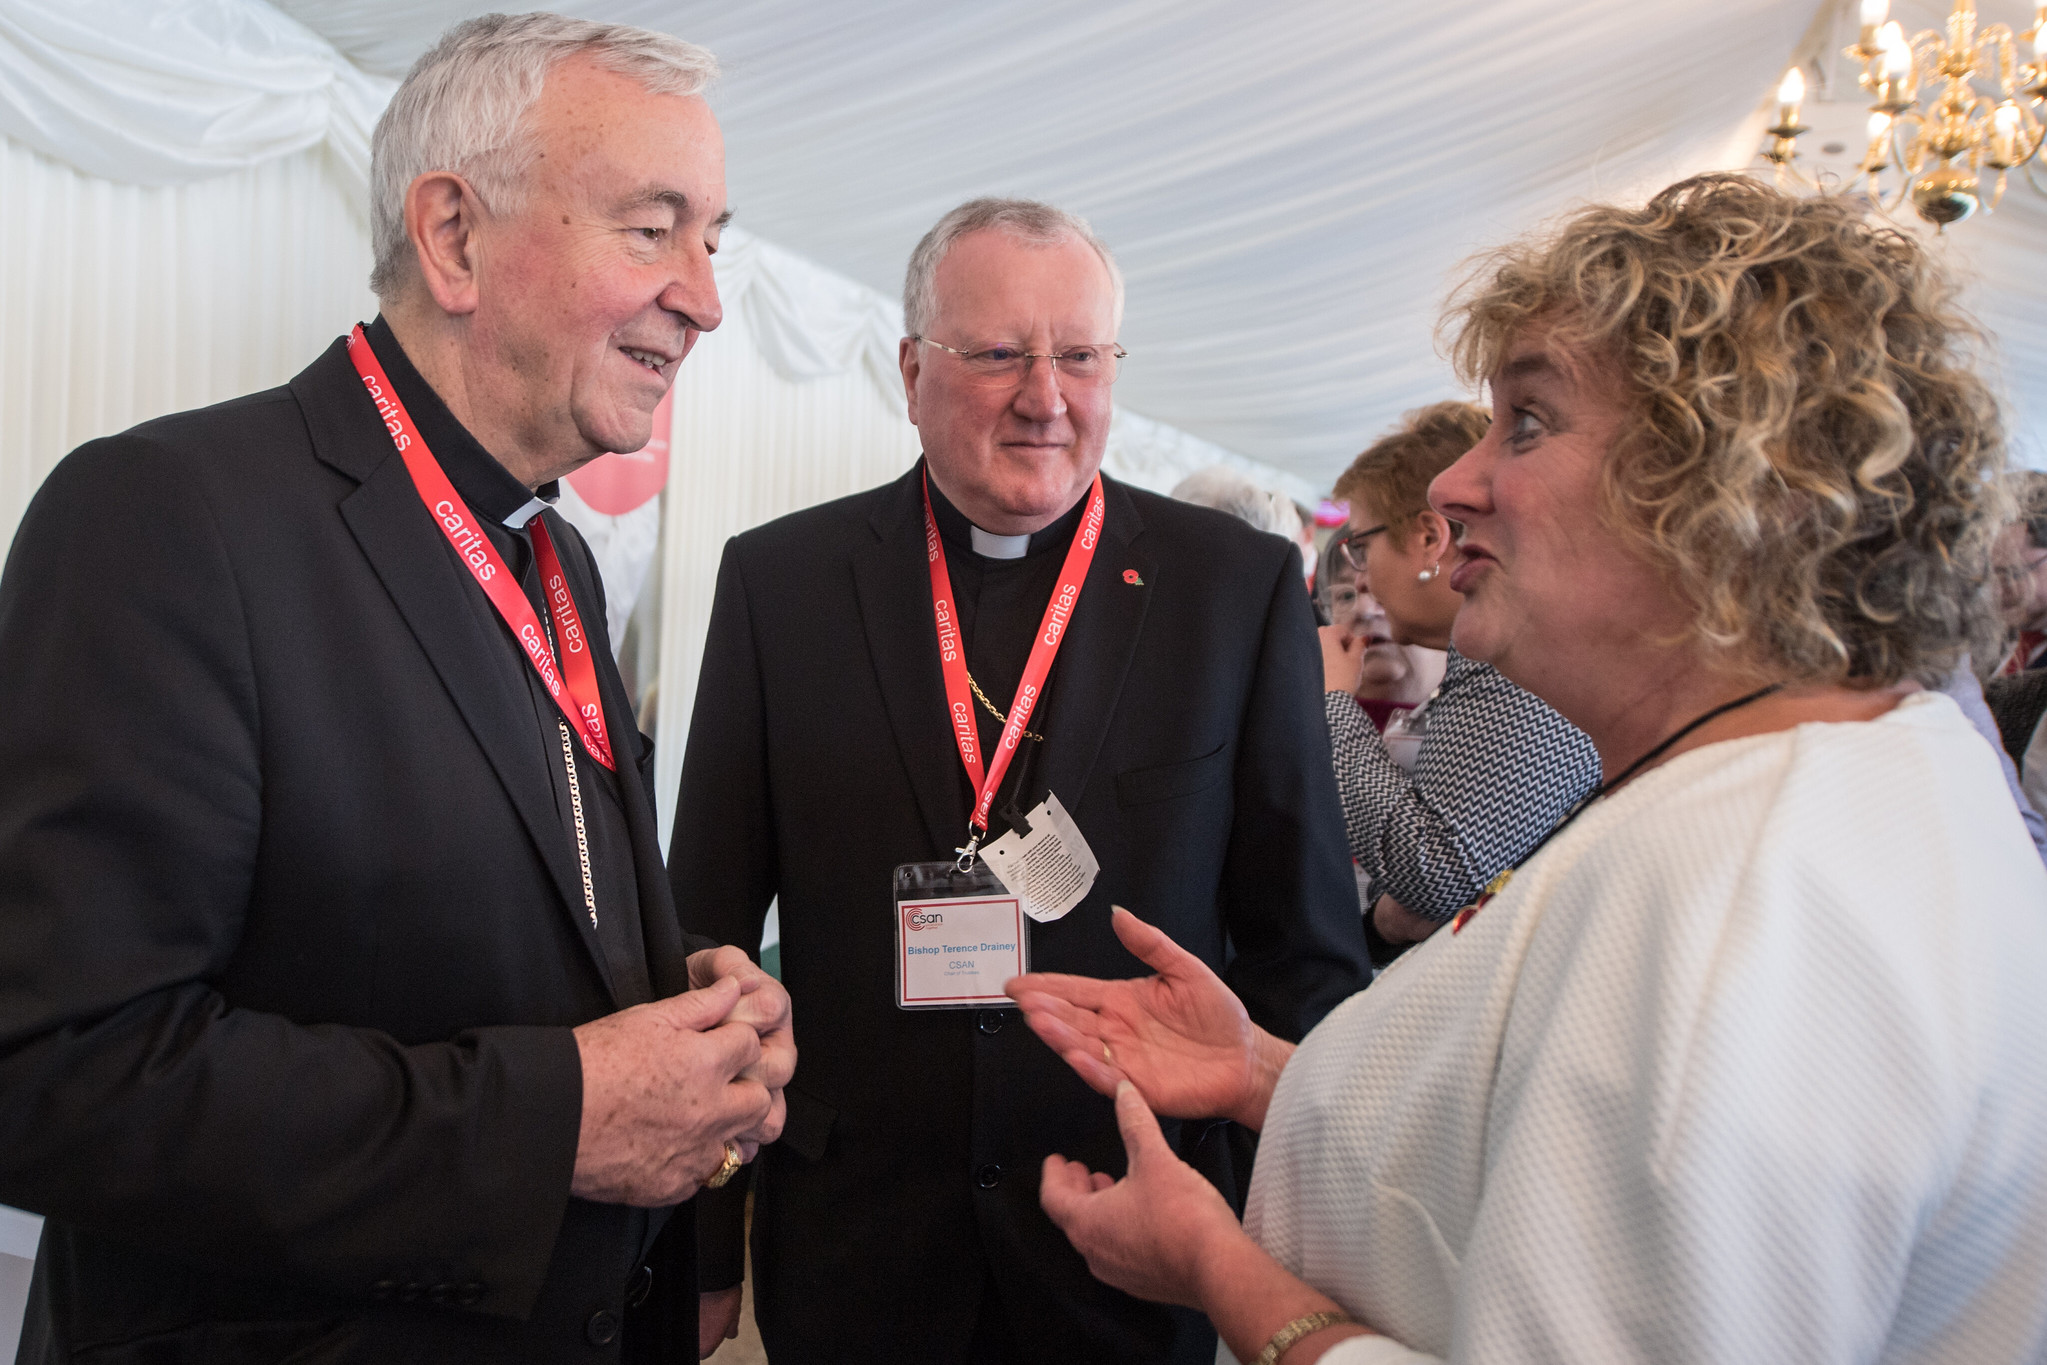 Cardinal Vincent Nichols with Bishop Terry at a CSAN parliamentary reception in 2016 © Mazur/catholicnews.org.uk